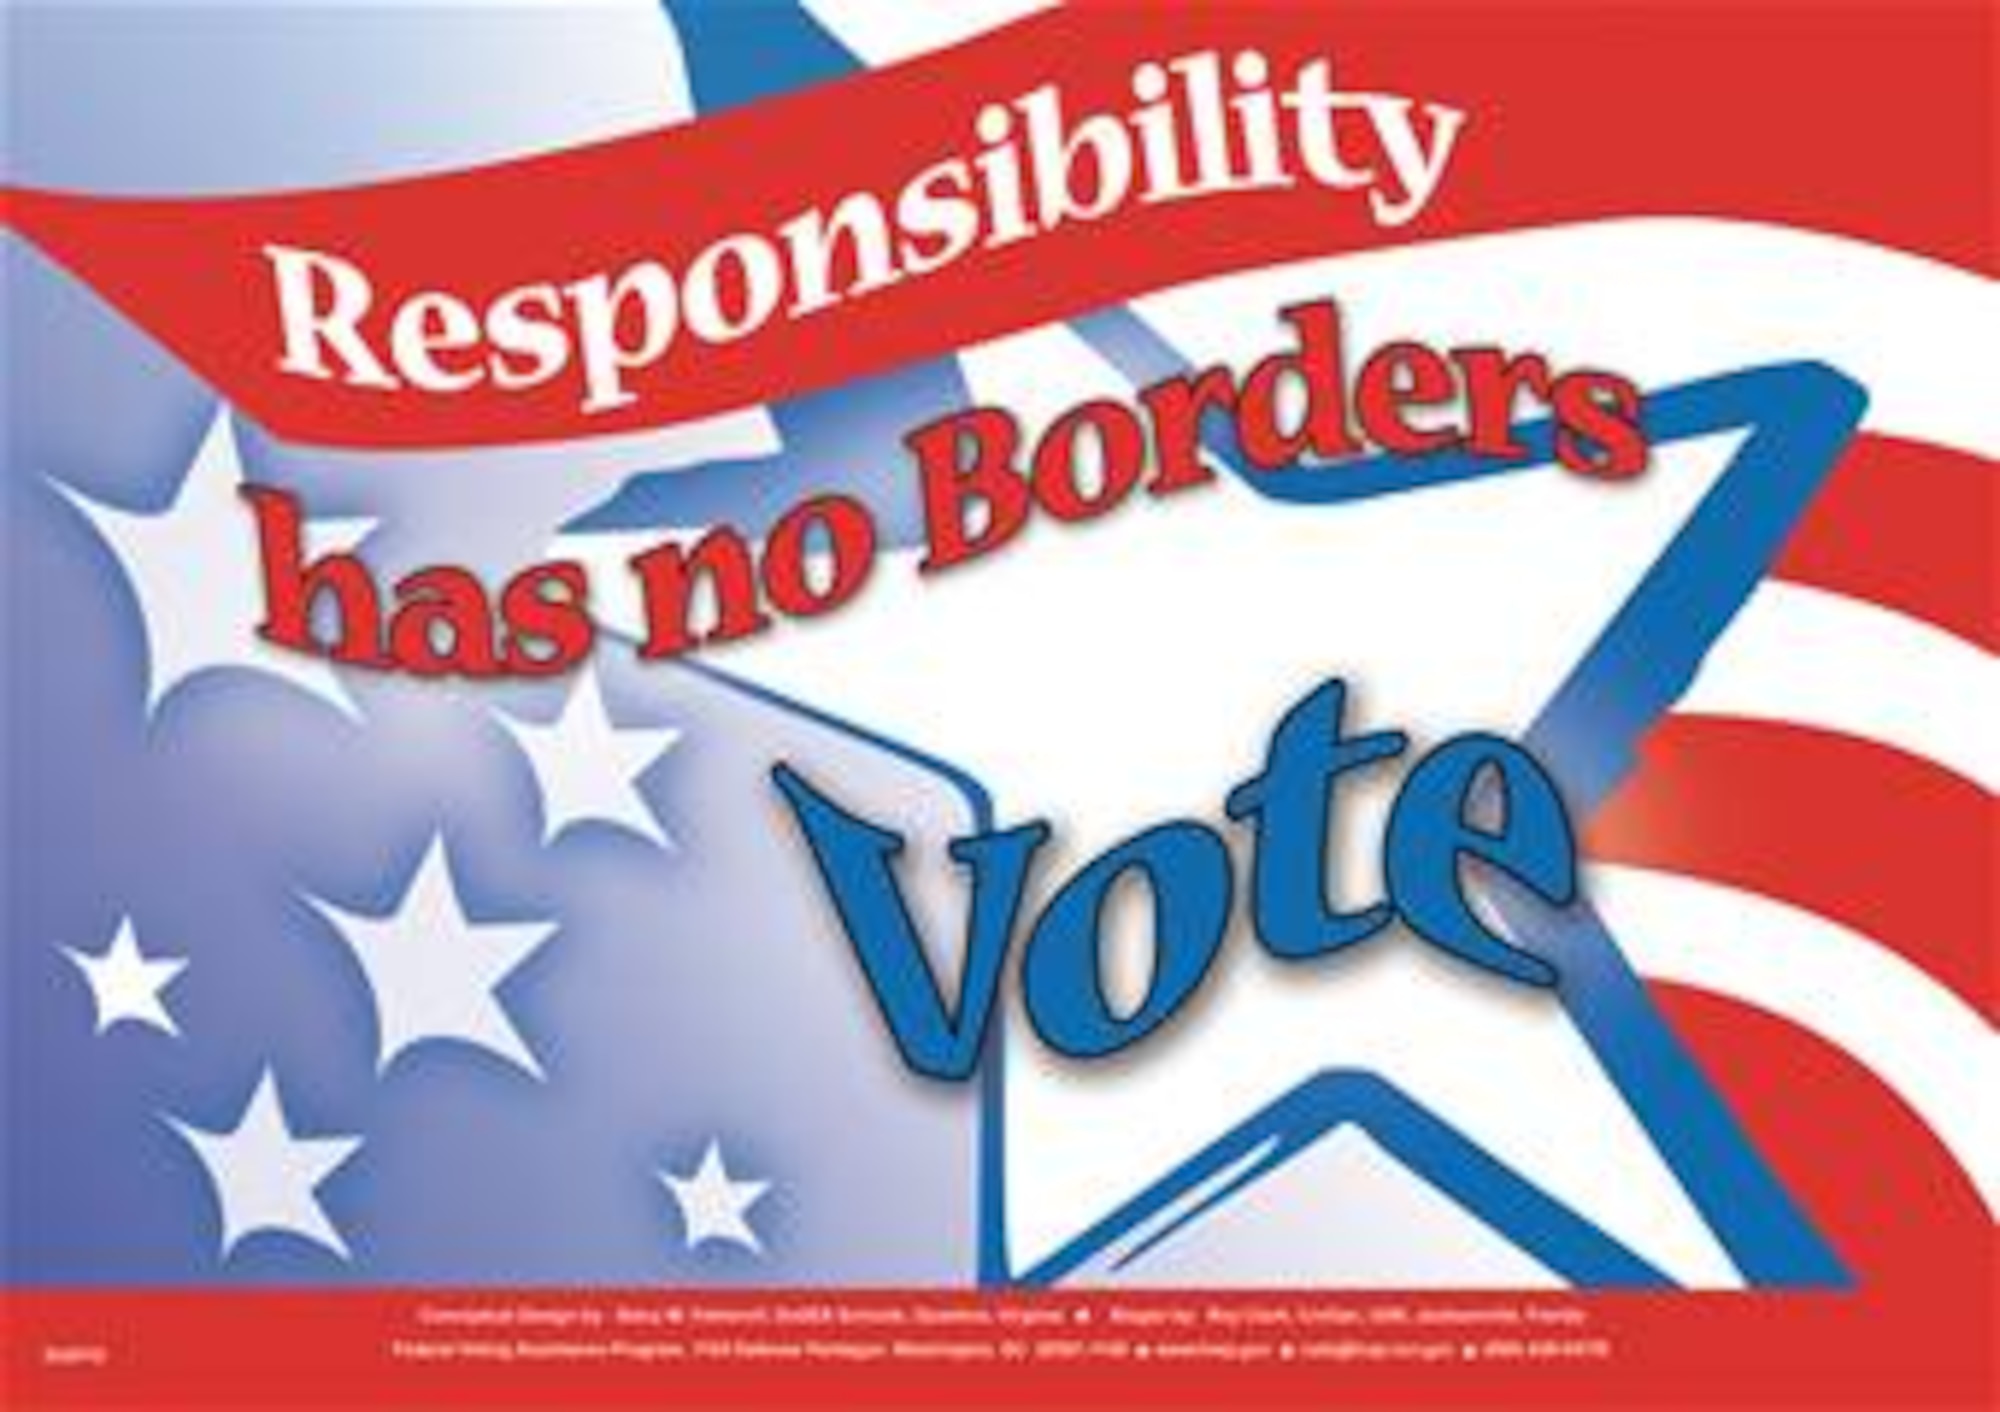 Voting No Boarders Poster.  Poster provided by the Department of Defense Federal Voting Assistance Program and is available as a PDF up to 22x15.5 inches.  Download at: http://www.fvap.gov/vao/posterdownloads.html. 